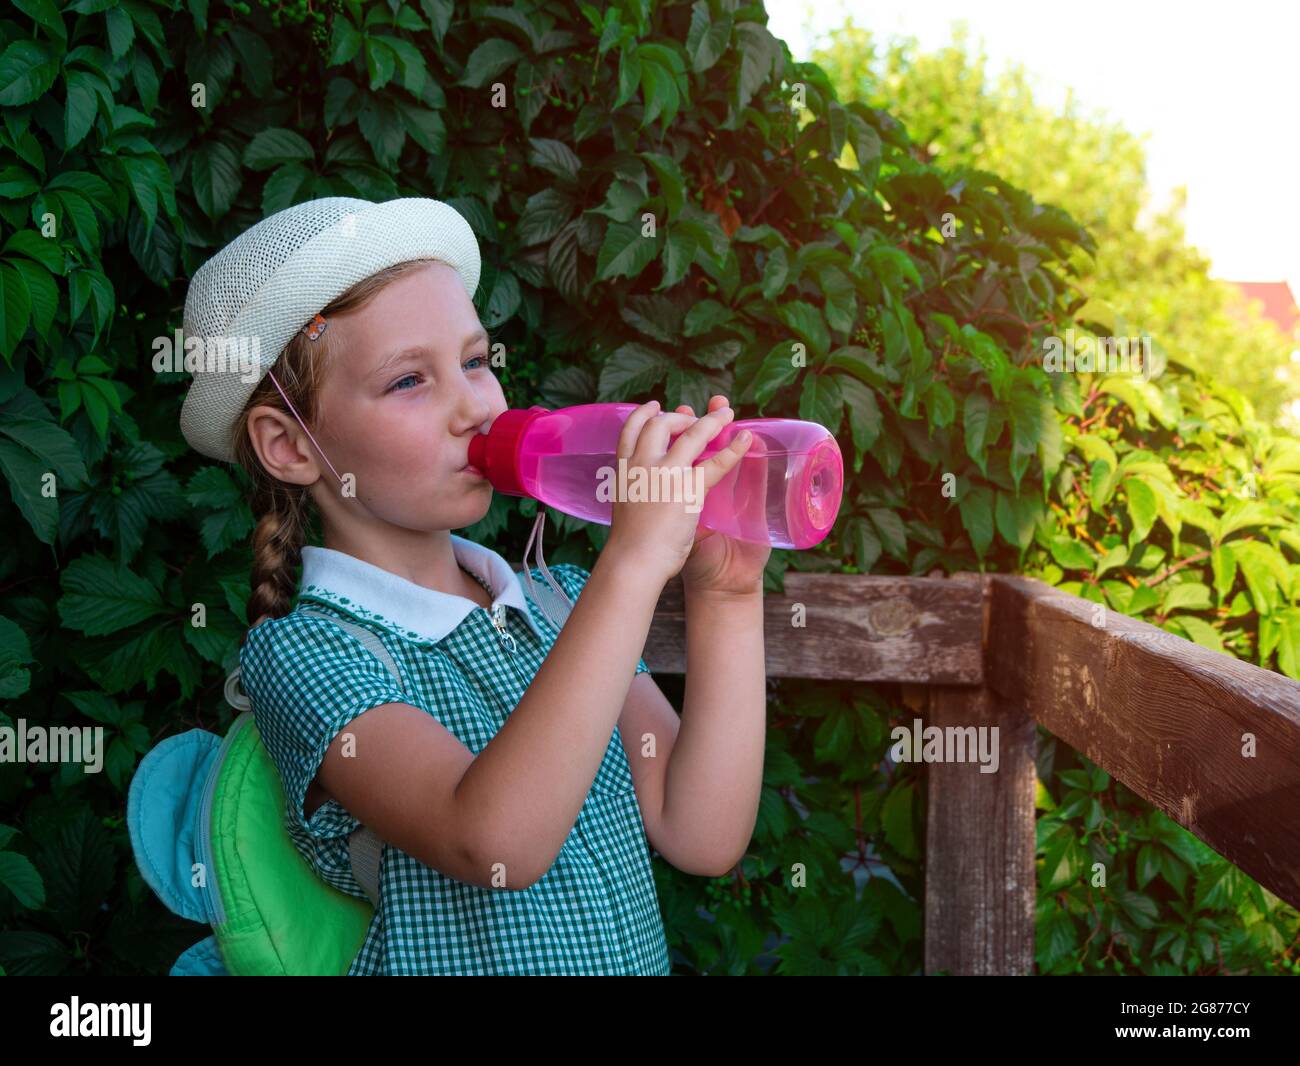 https://c8.alamy.com/comp/2G877CY/cute-school-little-girl-drinks-water-from-reusable-pink-bottle-outdoor-child-in-hat-enjoys-fresh-cold-water-on-green-summer-street-body-rehydration-2G877CY.jpg